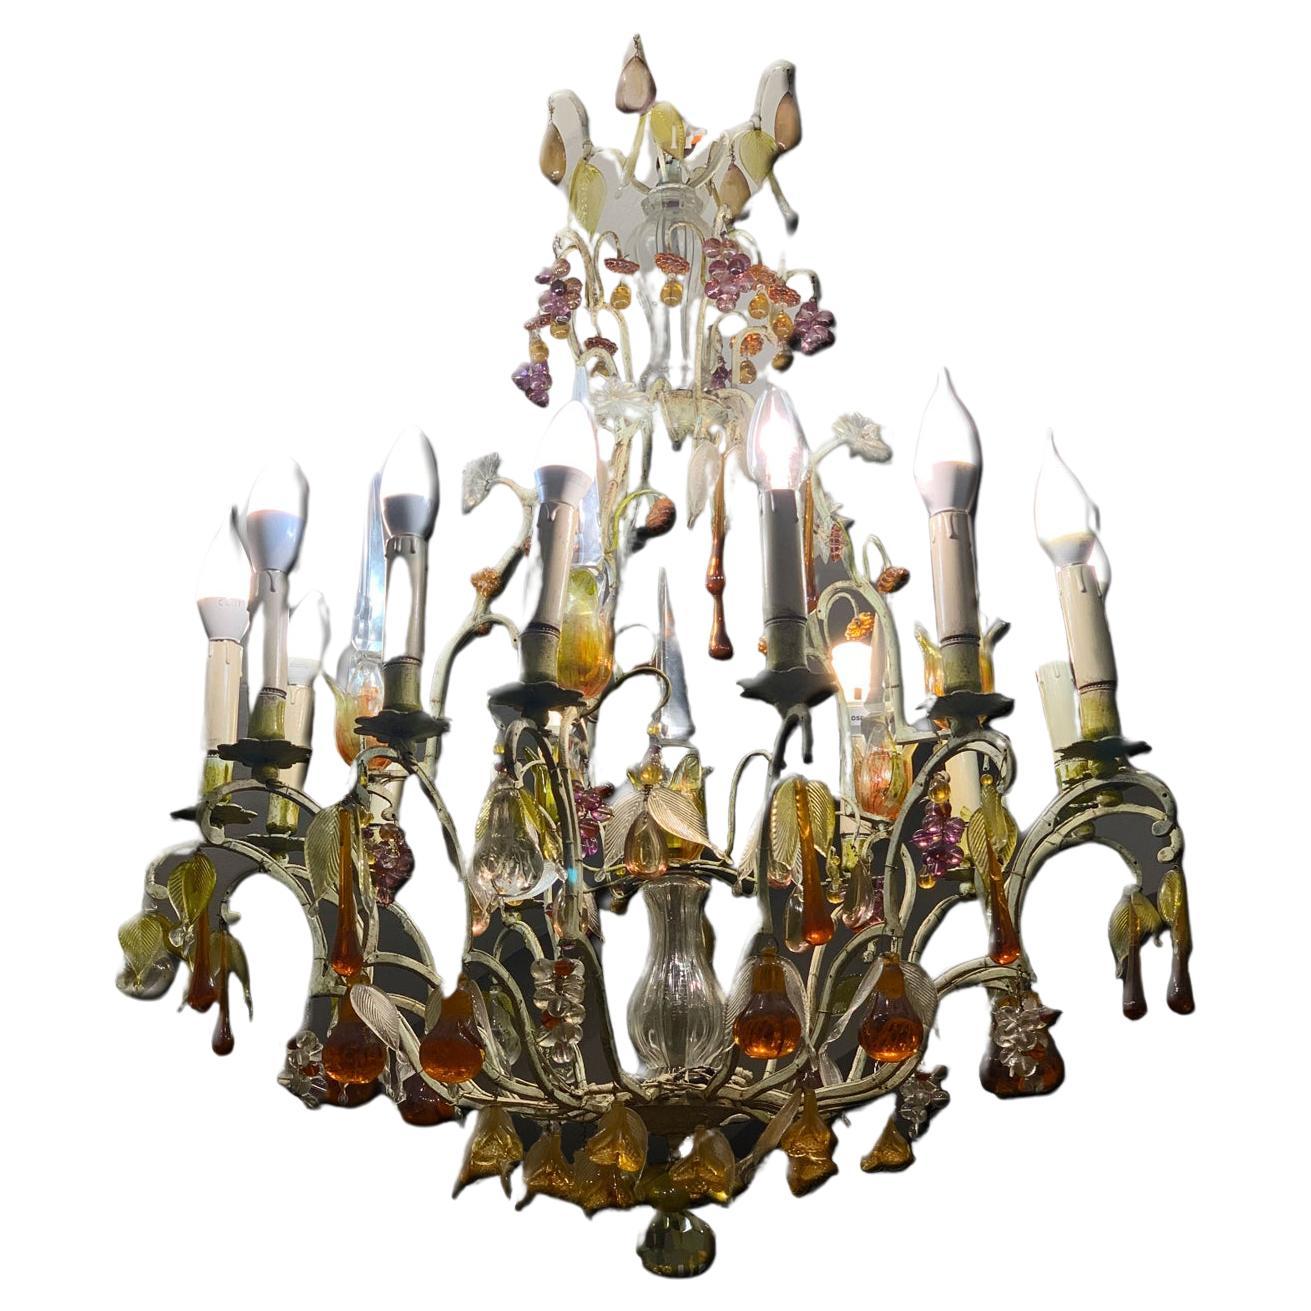 19th CENTURY LACQUERED BRONZE CHANDELIER WITH GLASS FRUIT